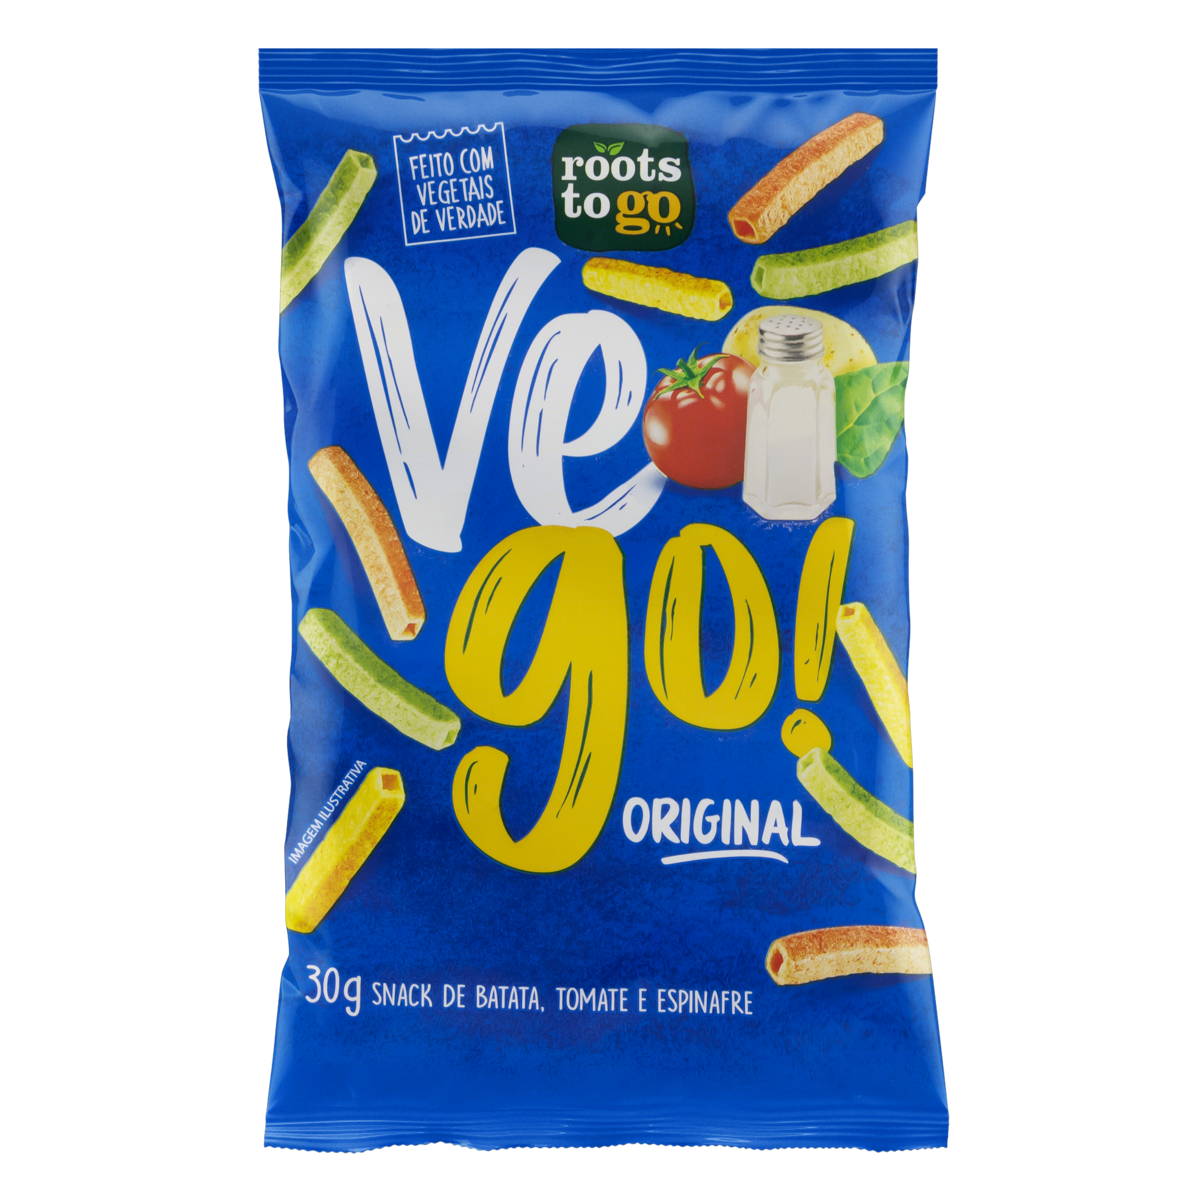 7898557010558 - SNACK ORIGINAL ROOTS TO GO VEGO PACOTE 30G